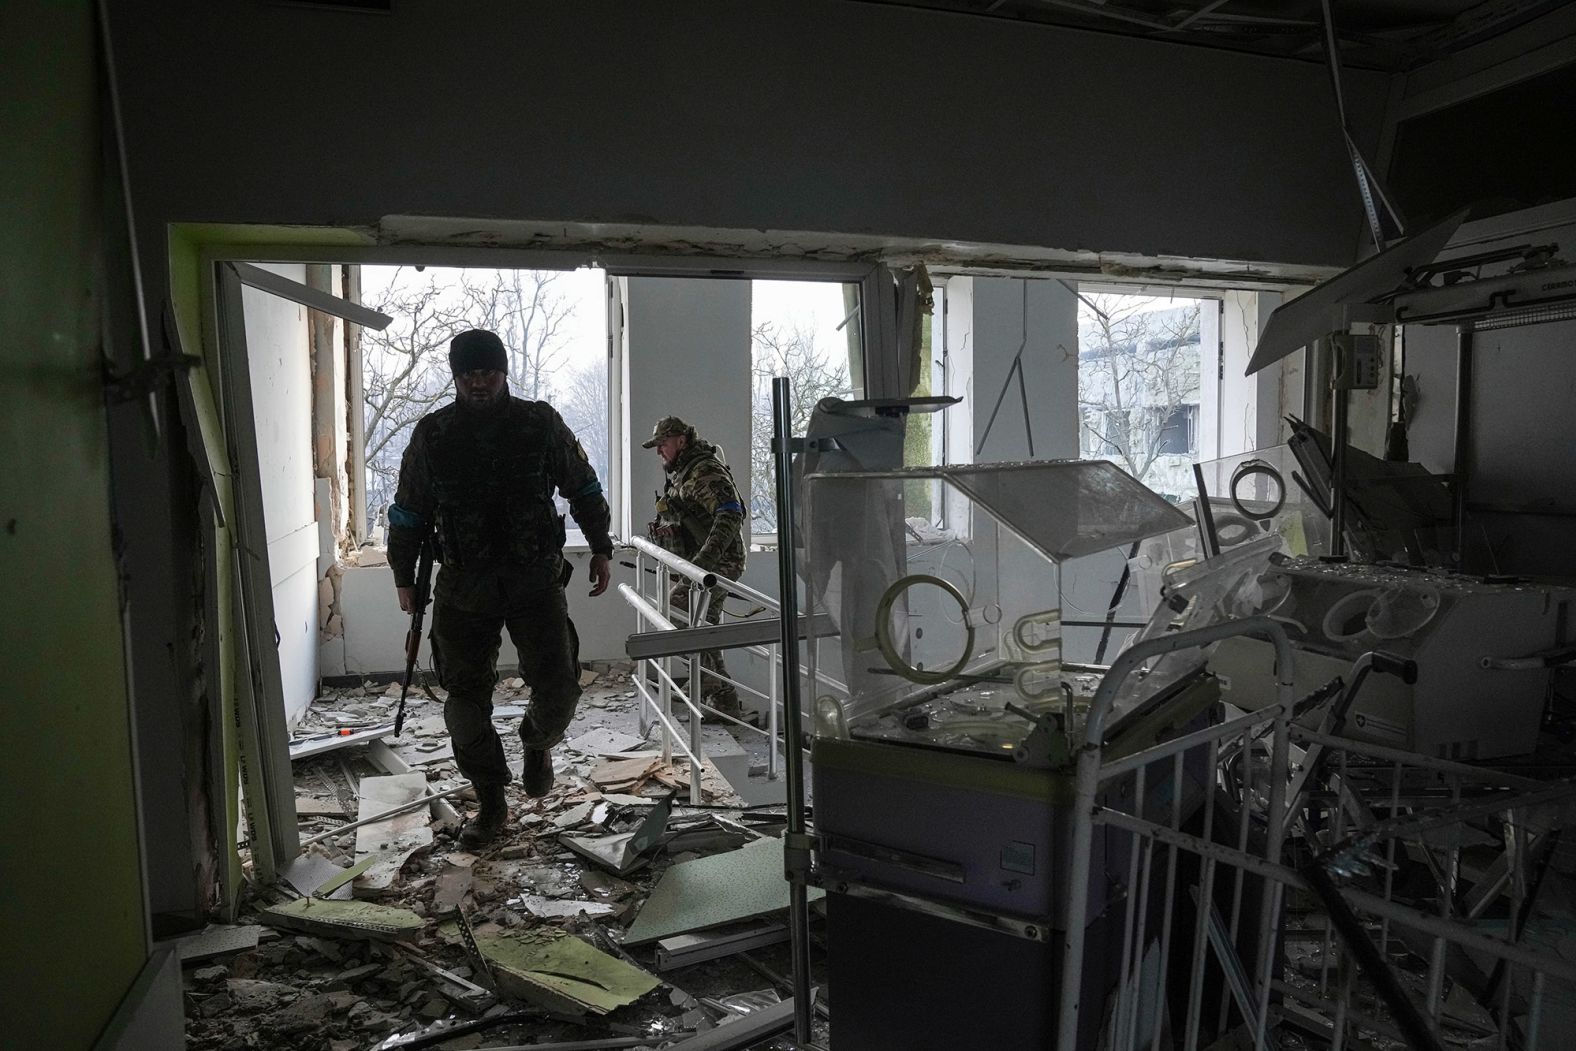 Ukrainian servicemen work inside the damaged hospital. "The destruction is enormous," the Mariupol city council said. "The building of the medical facility where the children were treated recently is completely destroyed."